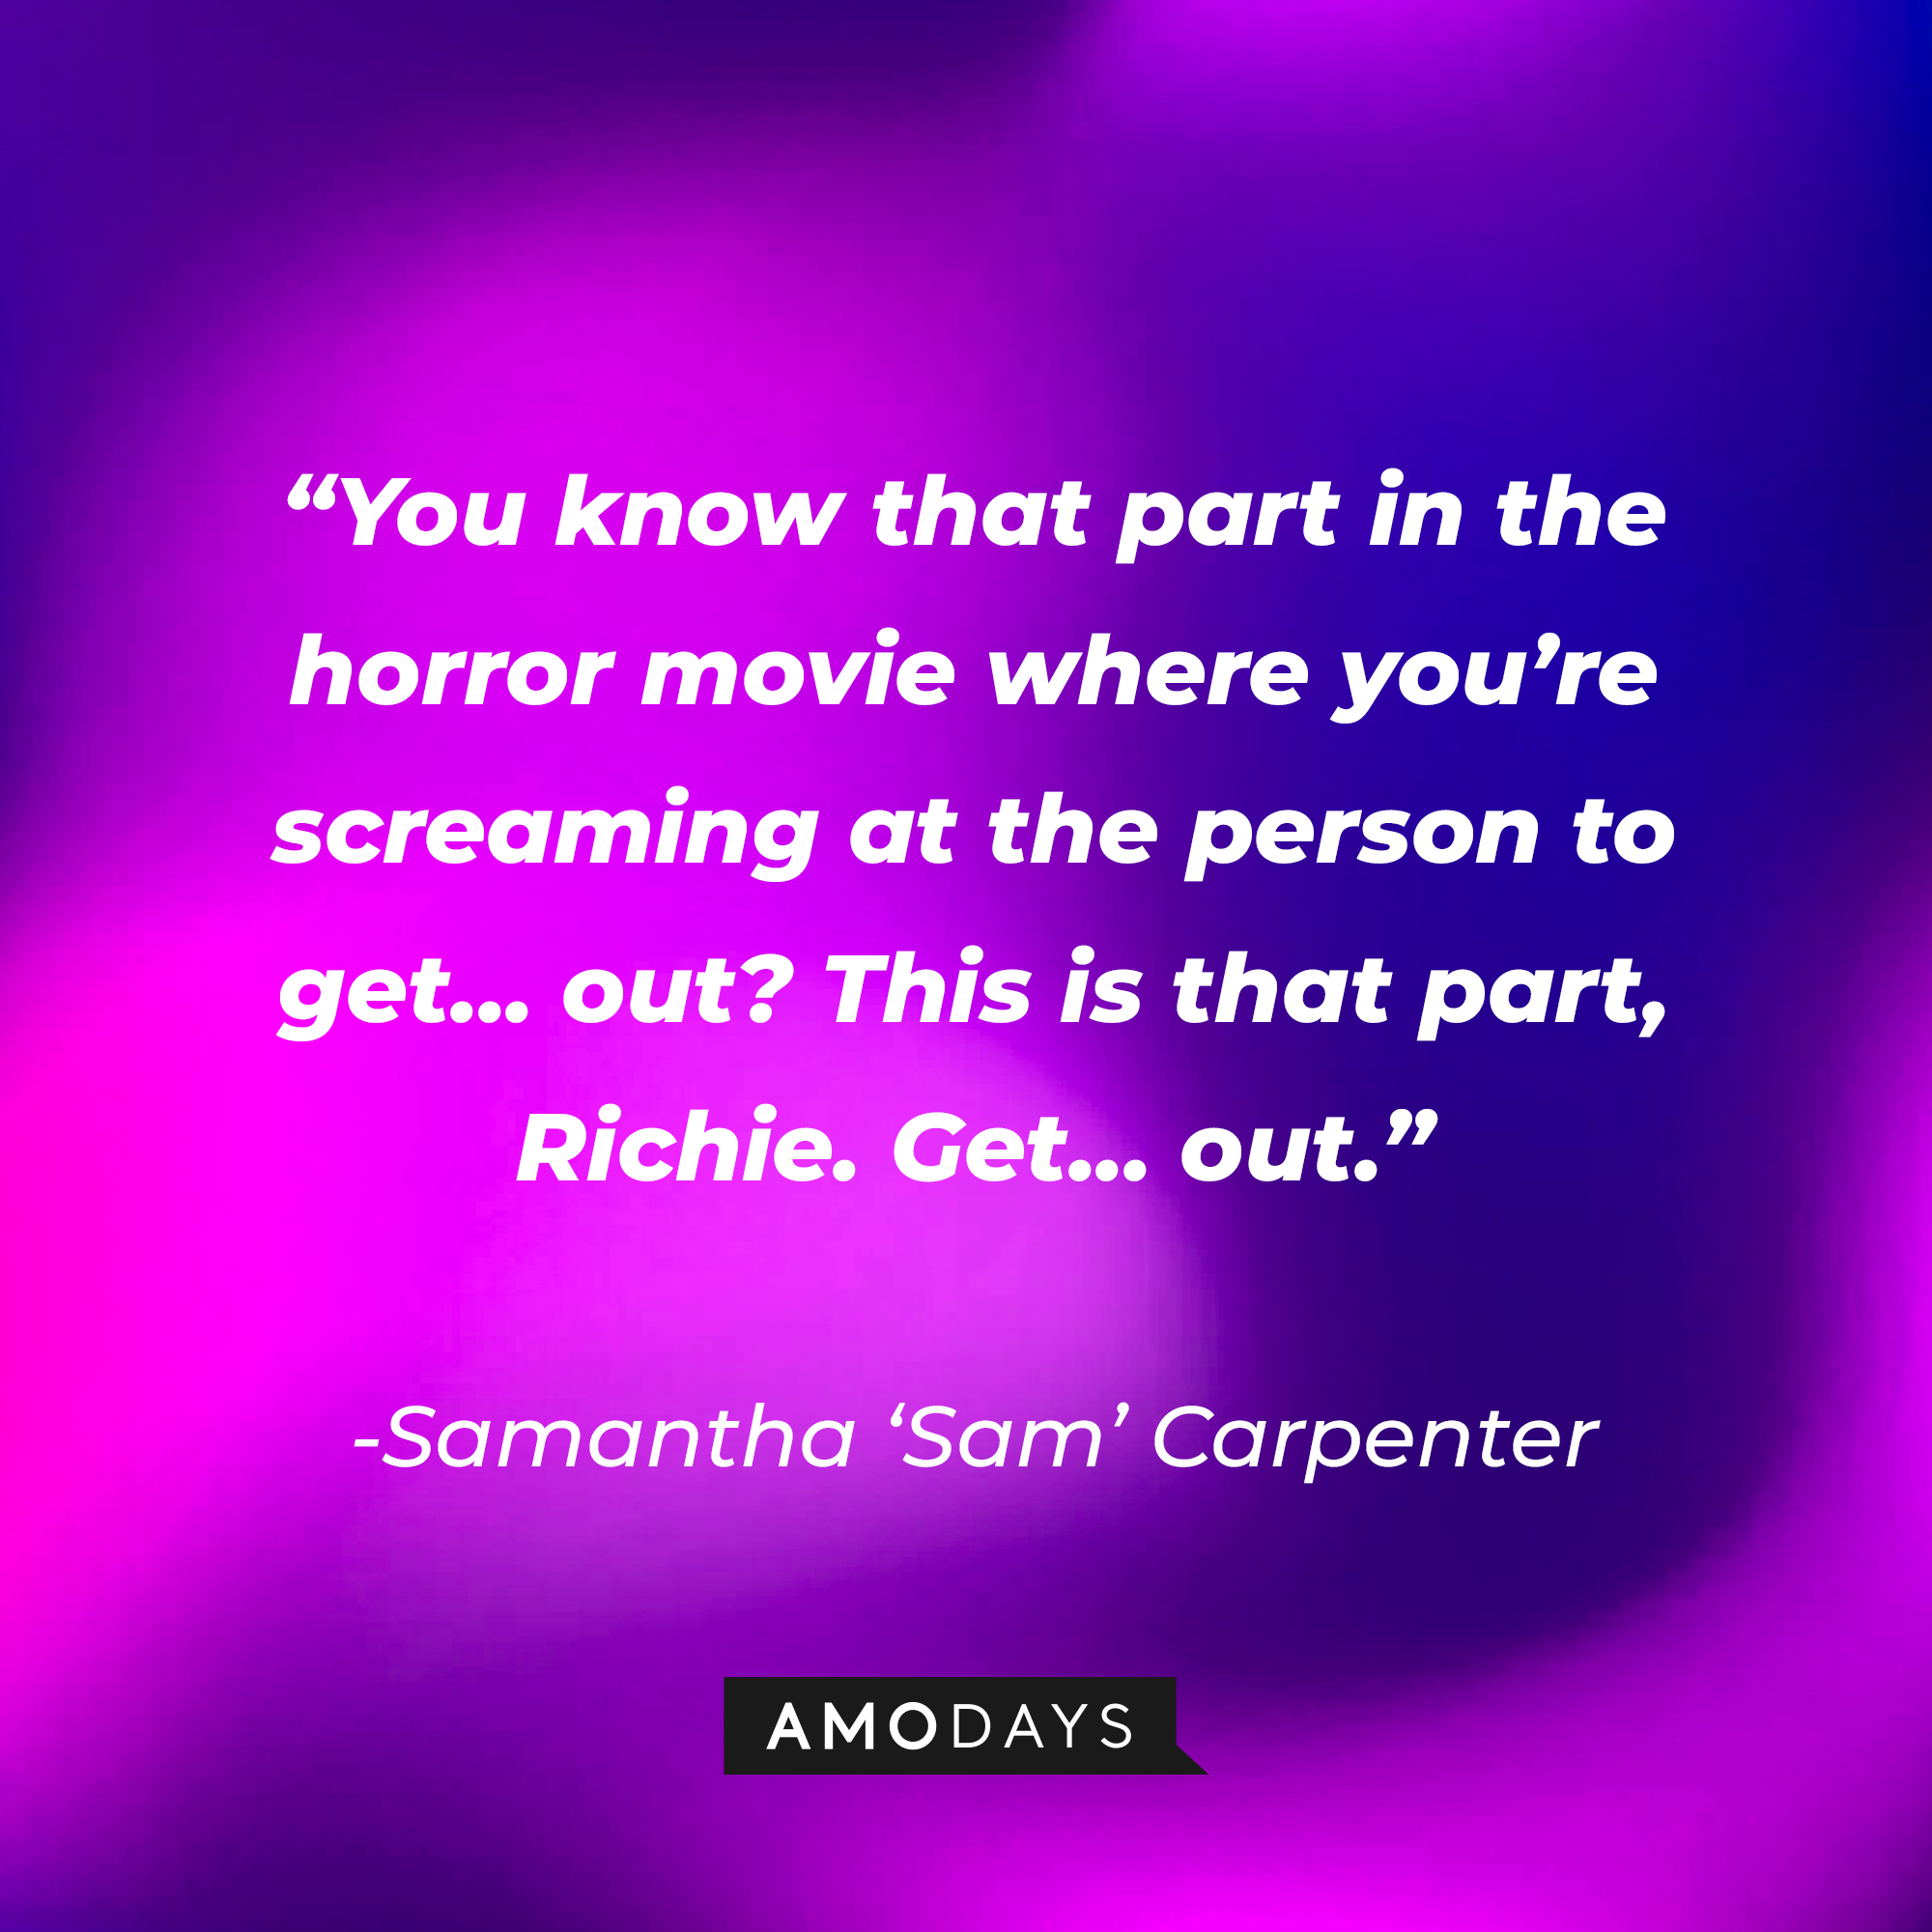 Samantha ‘Sam’ Carpenter’s quote from “Scream '(2020)'": “You know that part in the horror movie where you’re screaming at the person to get...out? This is that part, Richie. Get... out." | Source: AmoDays